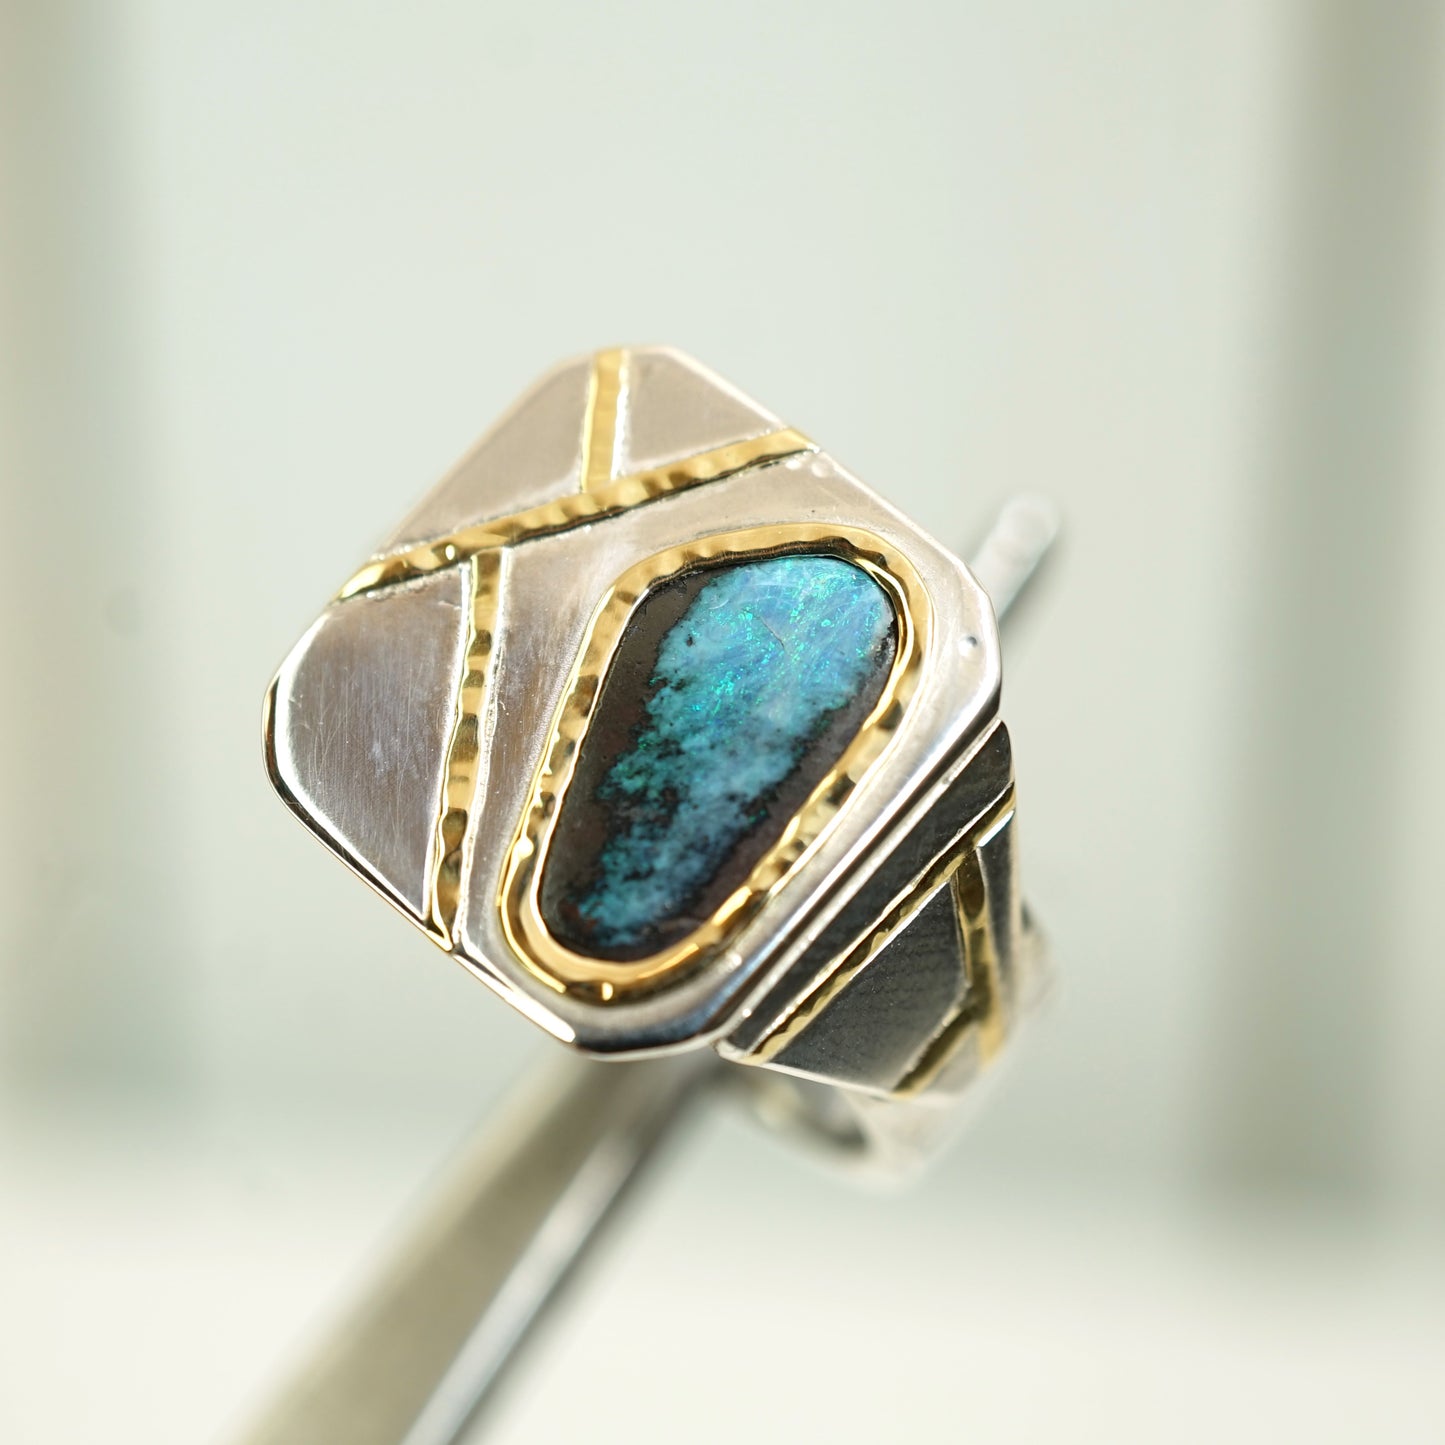 Australian Boulder opal, Silver and 18ct Gold Signet Ring, Size Q